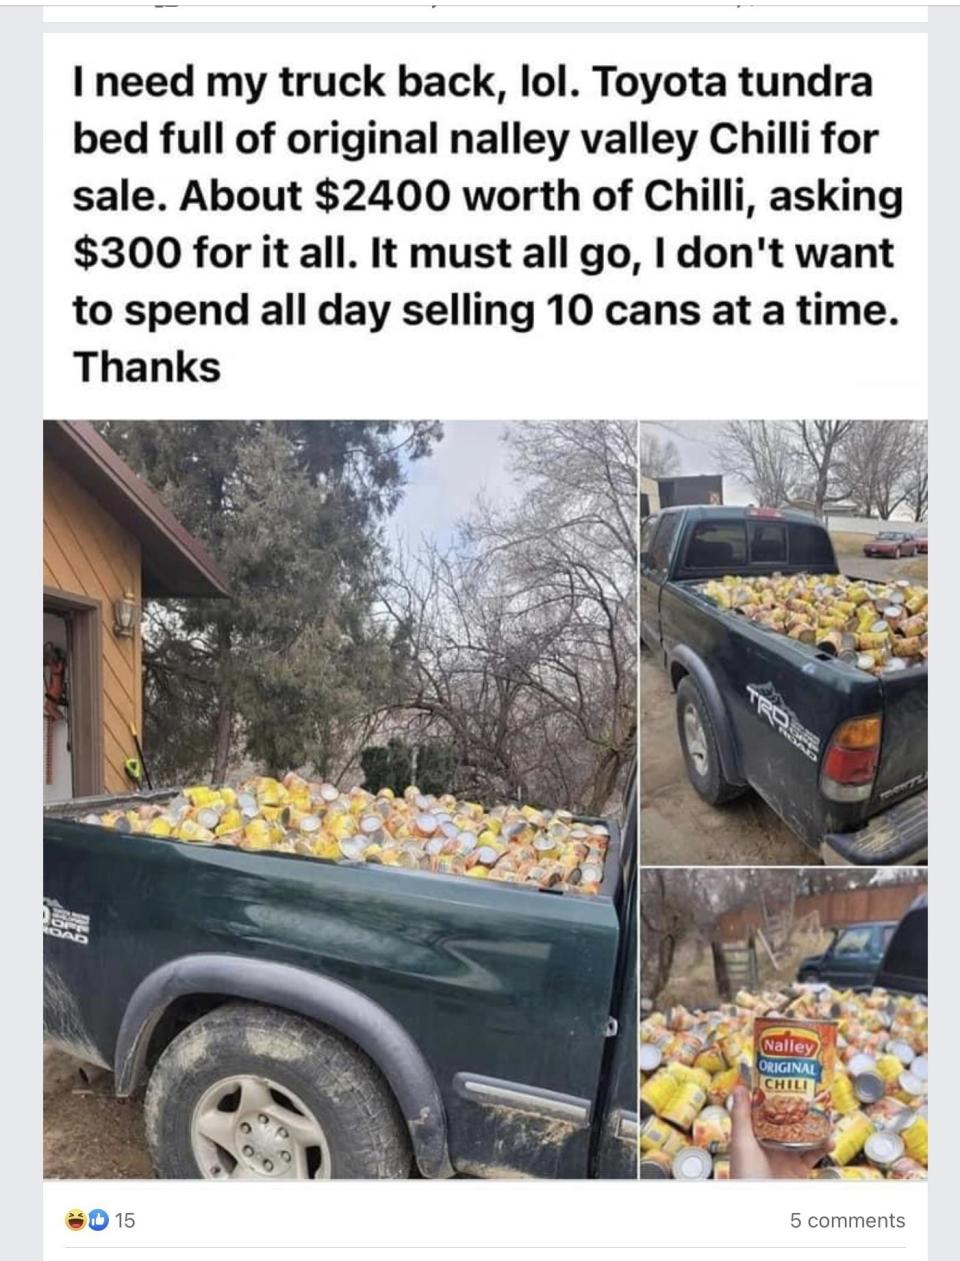 Image shows a pickup truck bed filled with numerous cans of Nalley Valley Chilli for sale. Text indicates a bulk sale offer to empty the truck